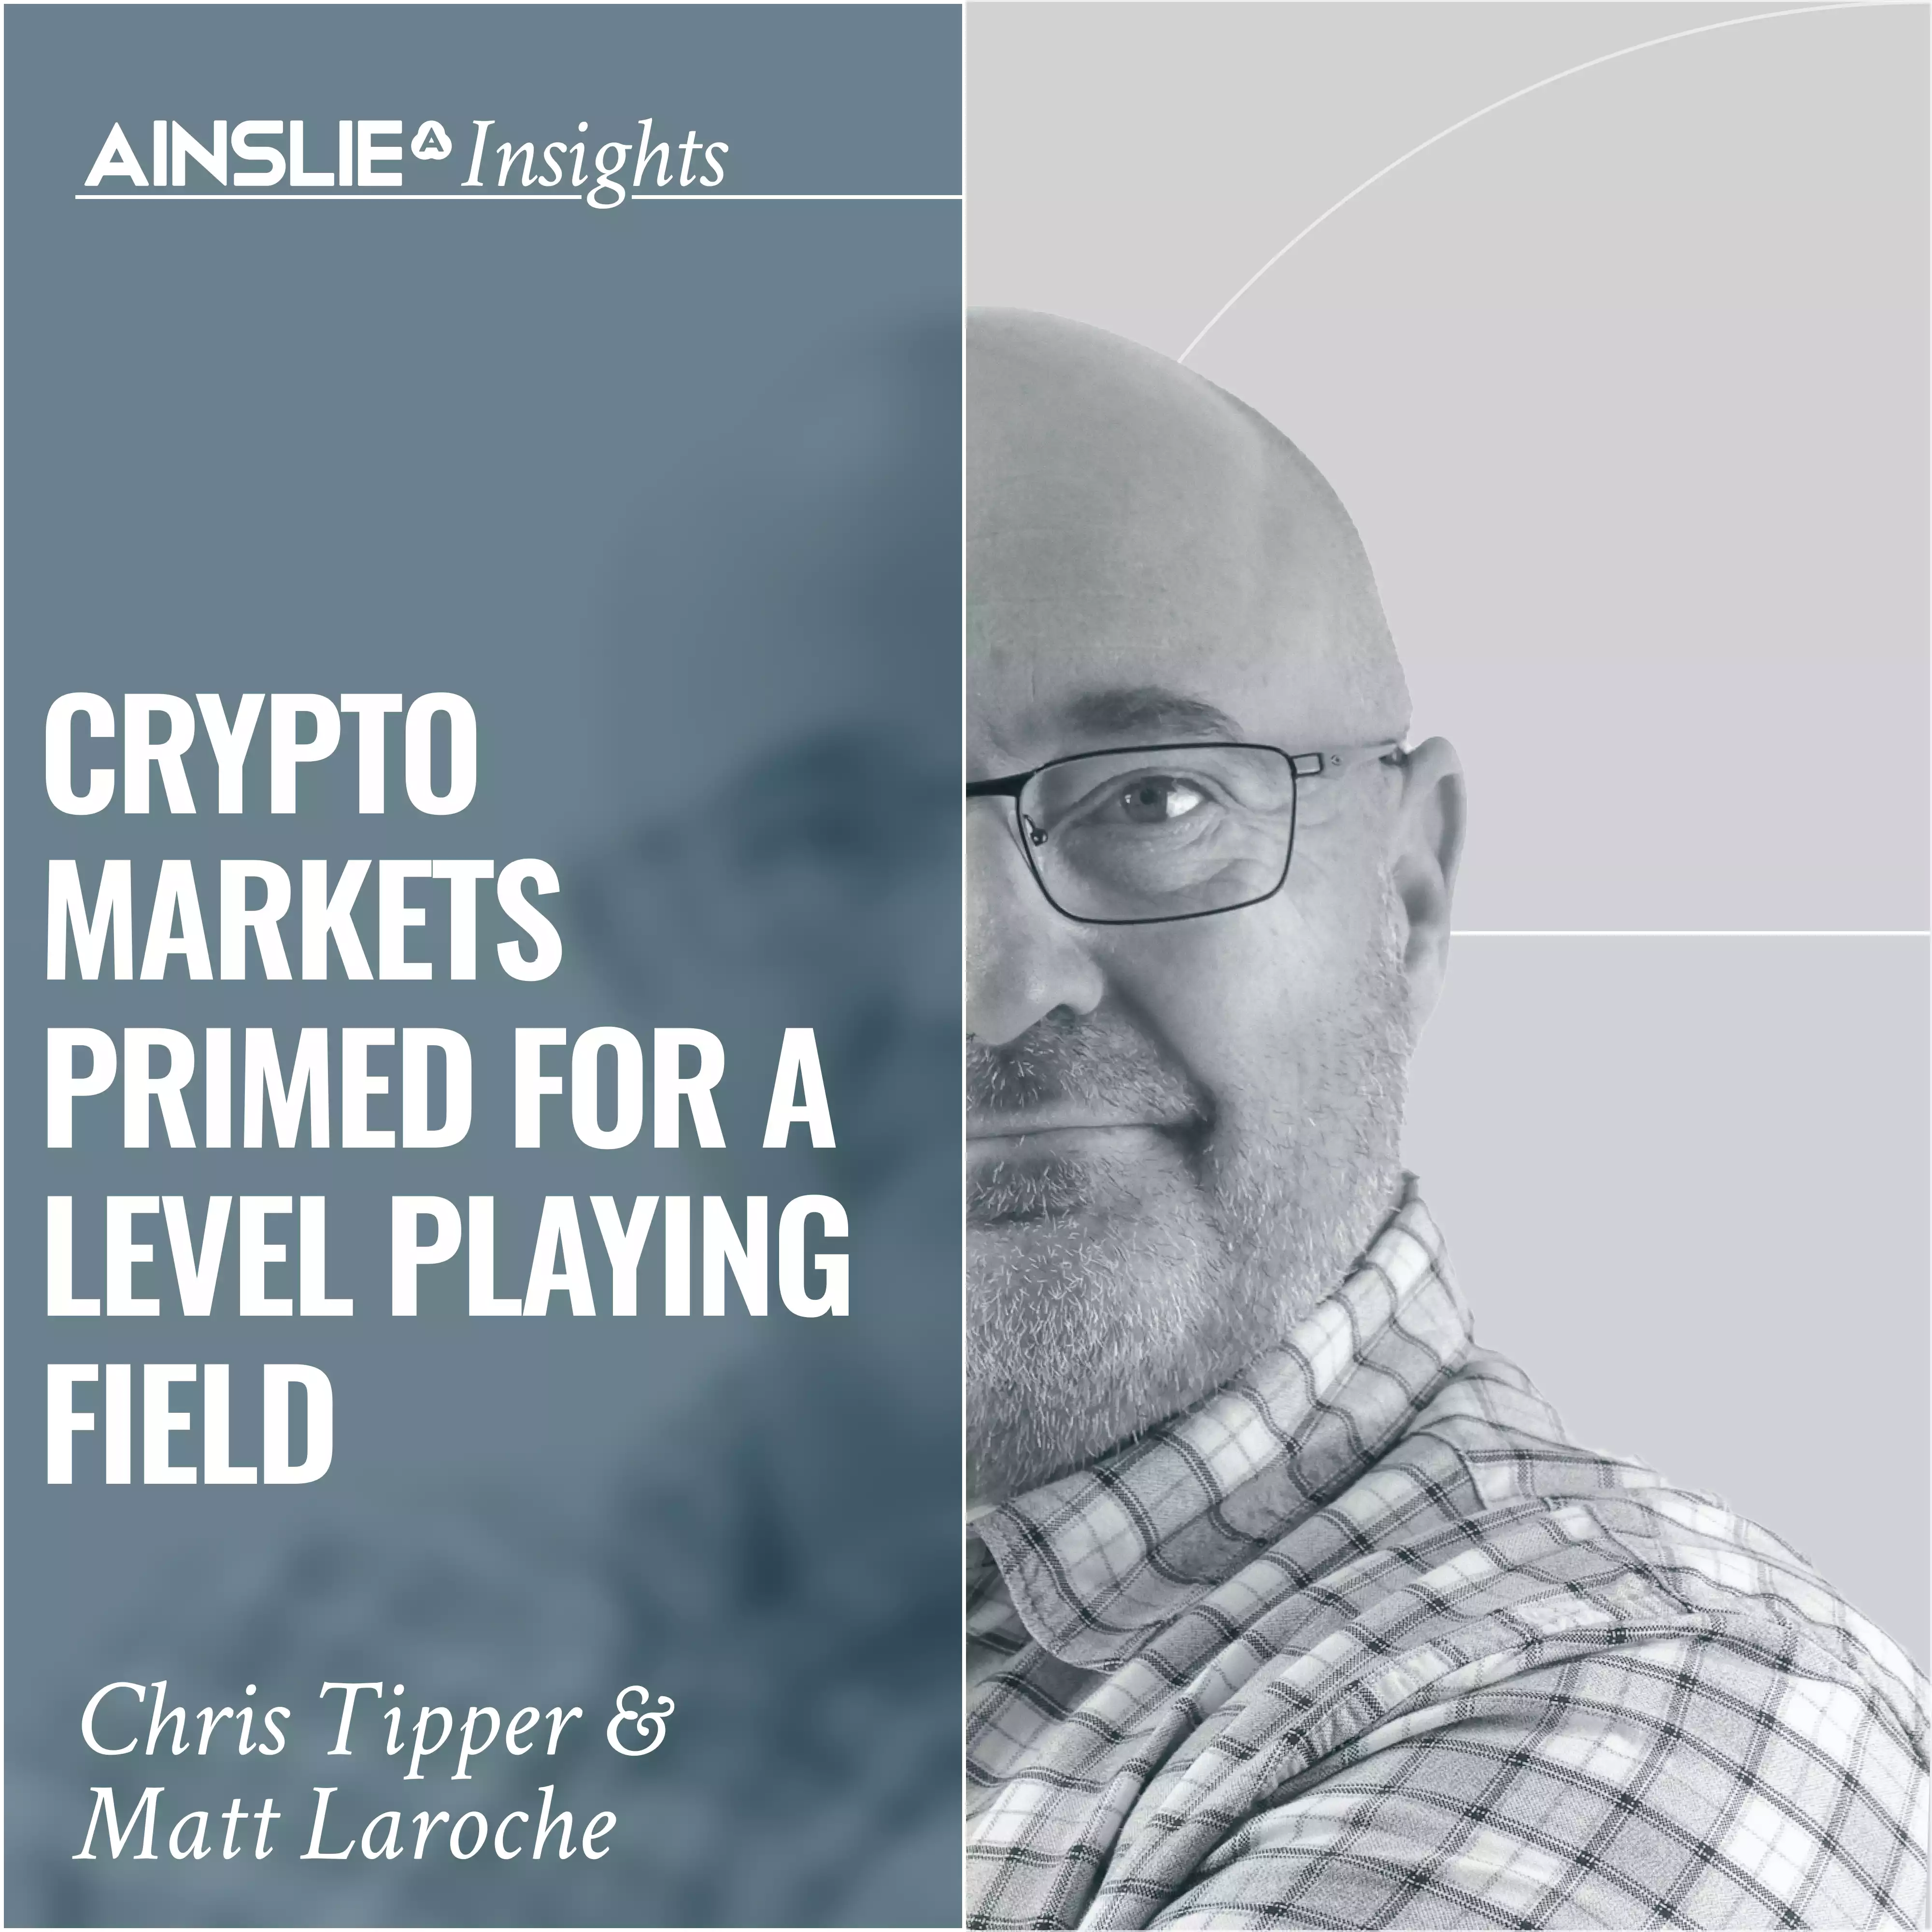 INSIGHTS: Crypto Markets Primed for a Level Playing Field - Is Change Coming?